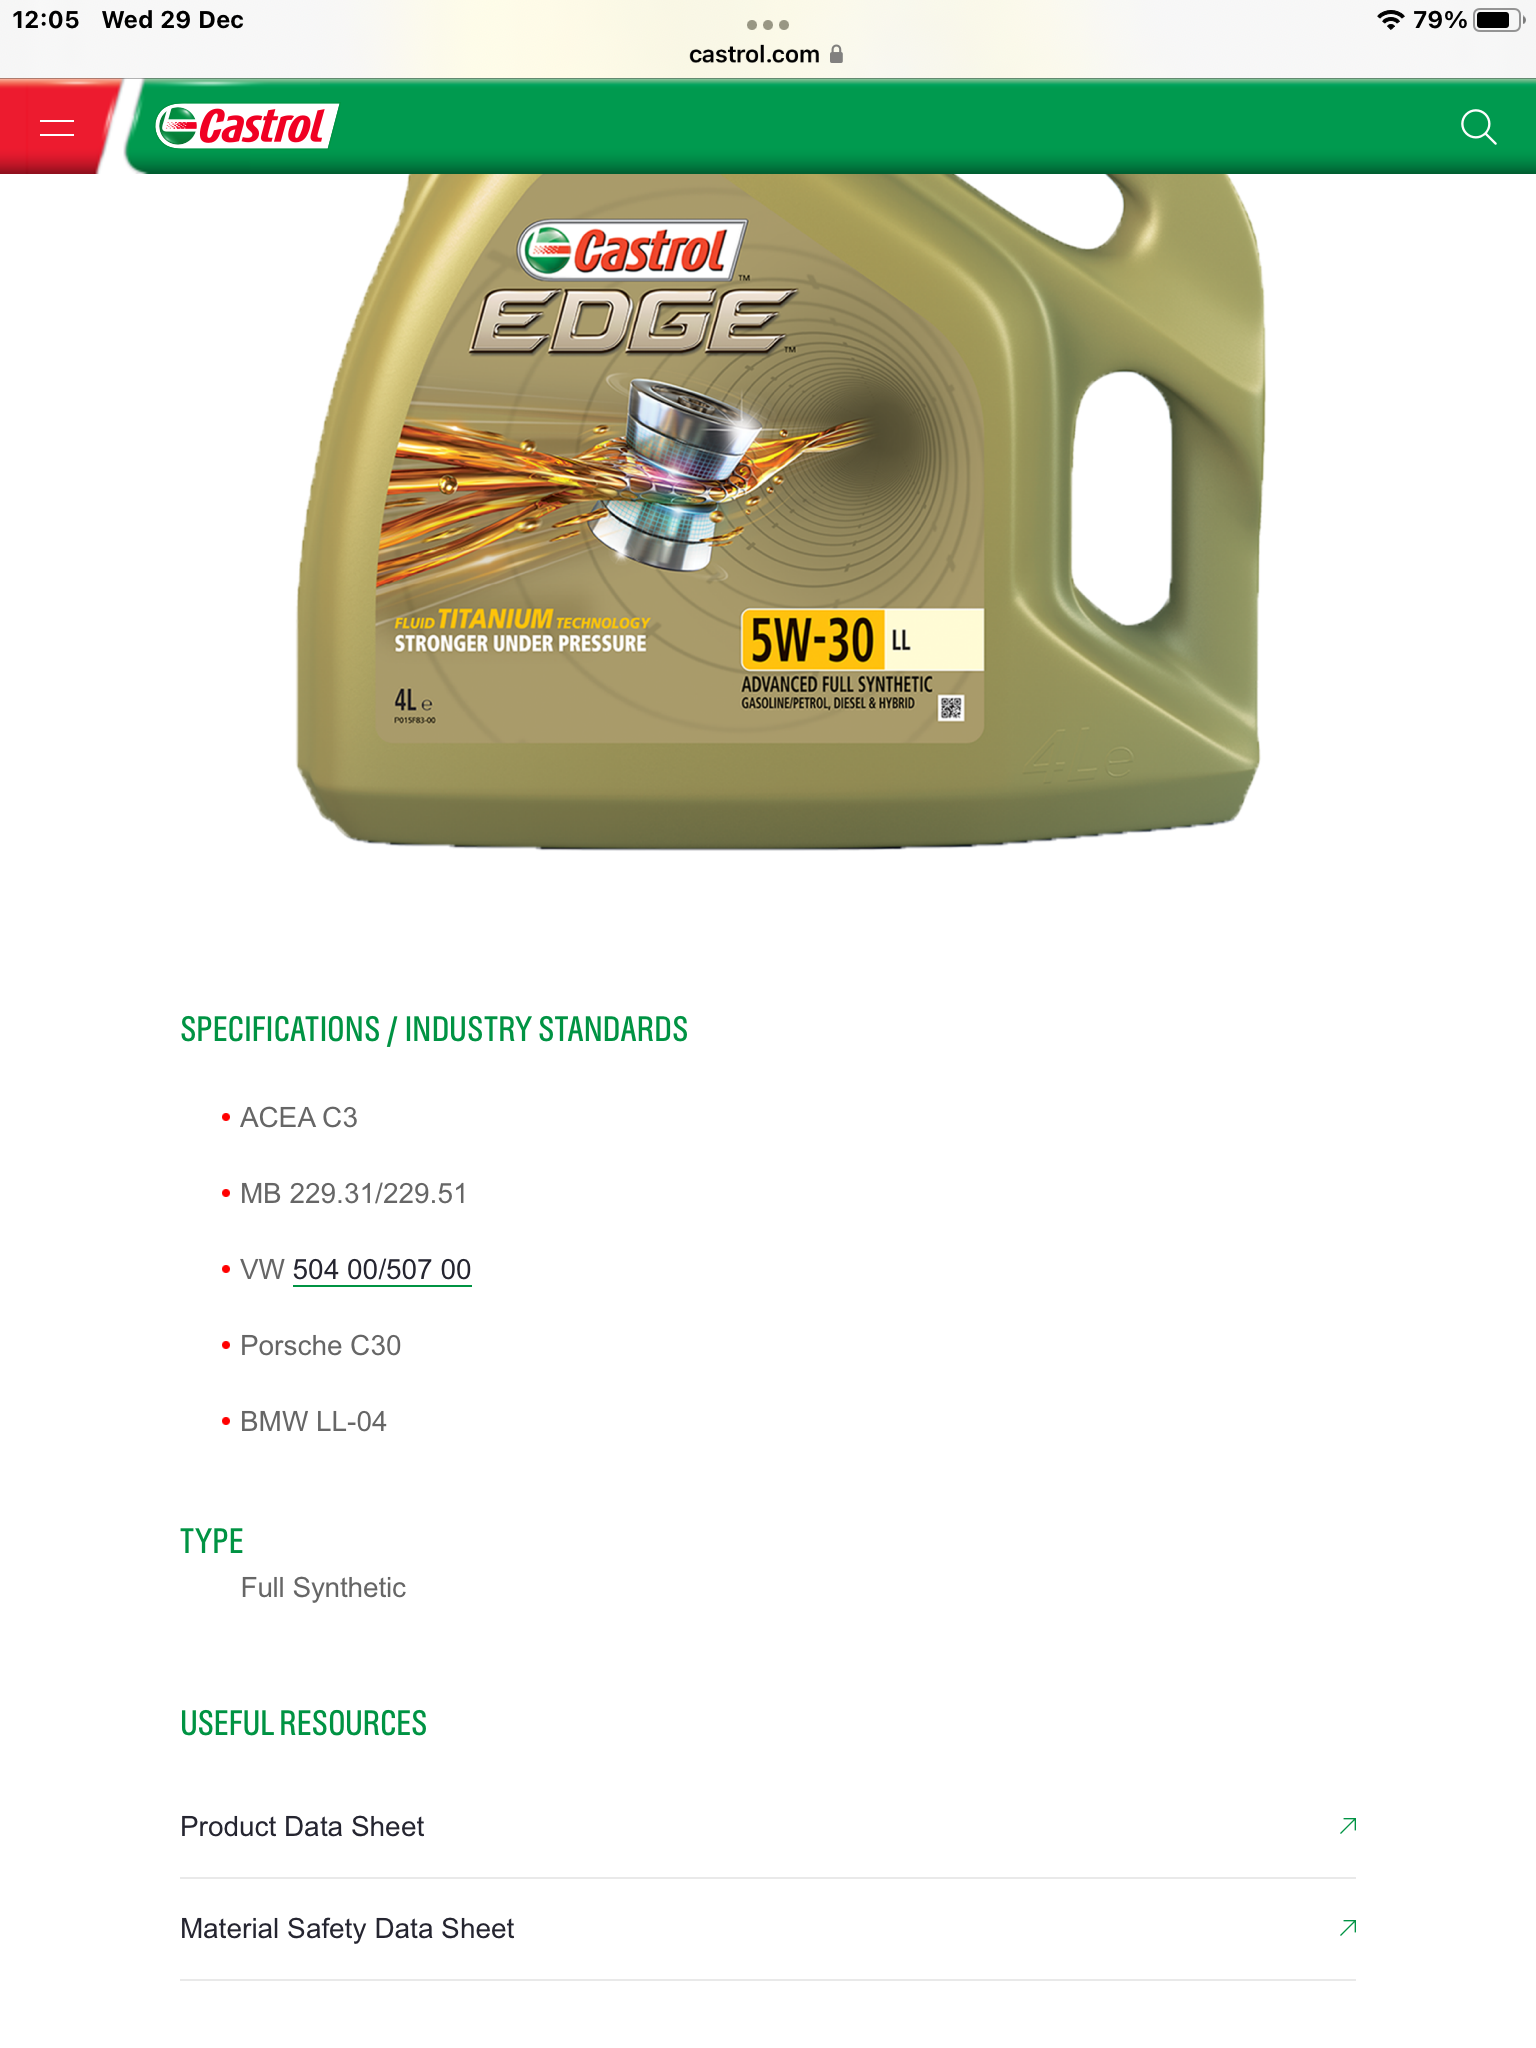 Total Quartz Energy 9000 5W40 How clean is engine oil? Test above 100°C 